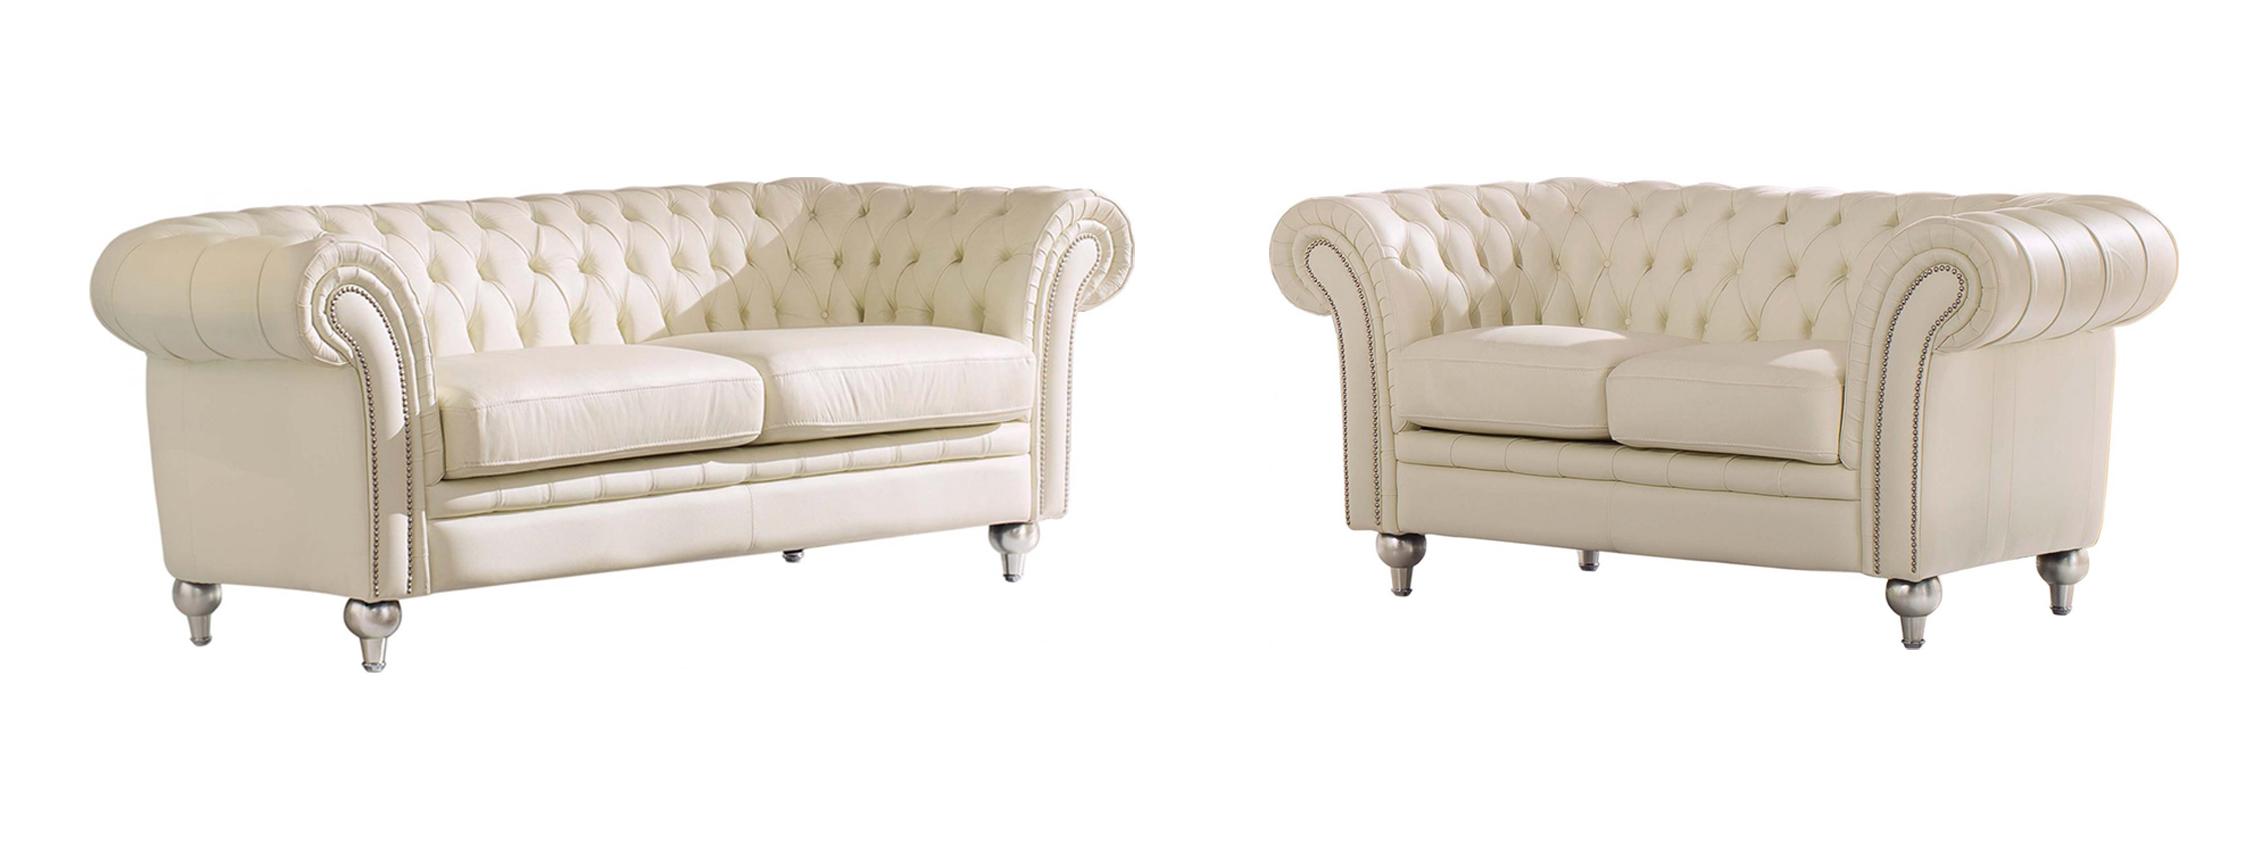 Contemporary Sofa and Loveseat Set LH2044-IV-S/L LH2044-IV-Sofa Set-2 in Ivory Genuine Leather